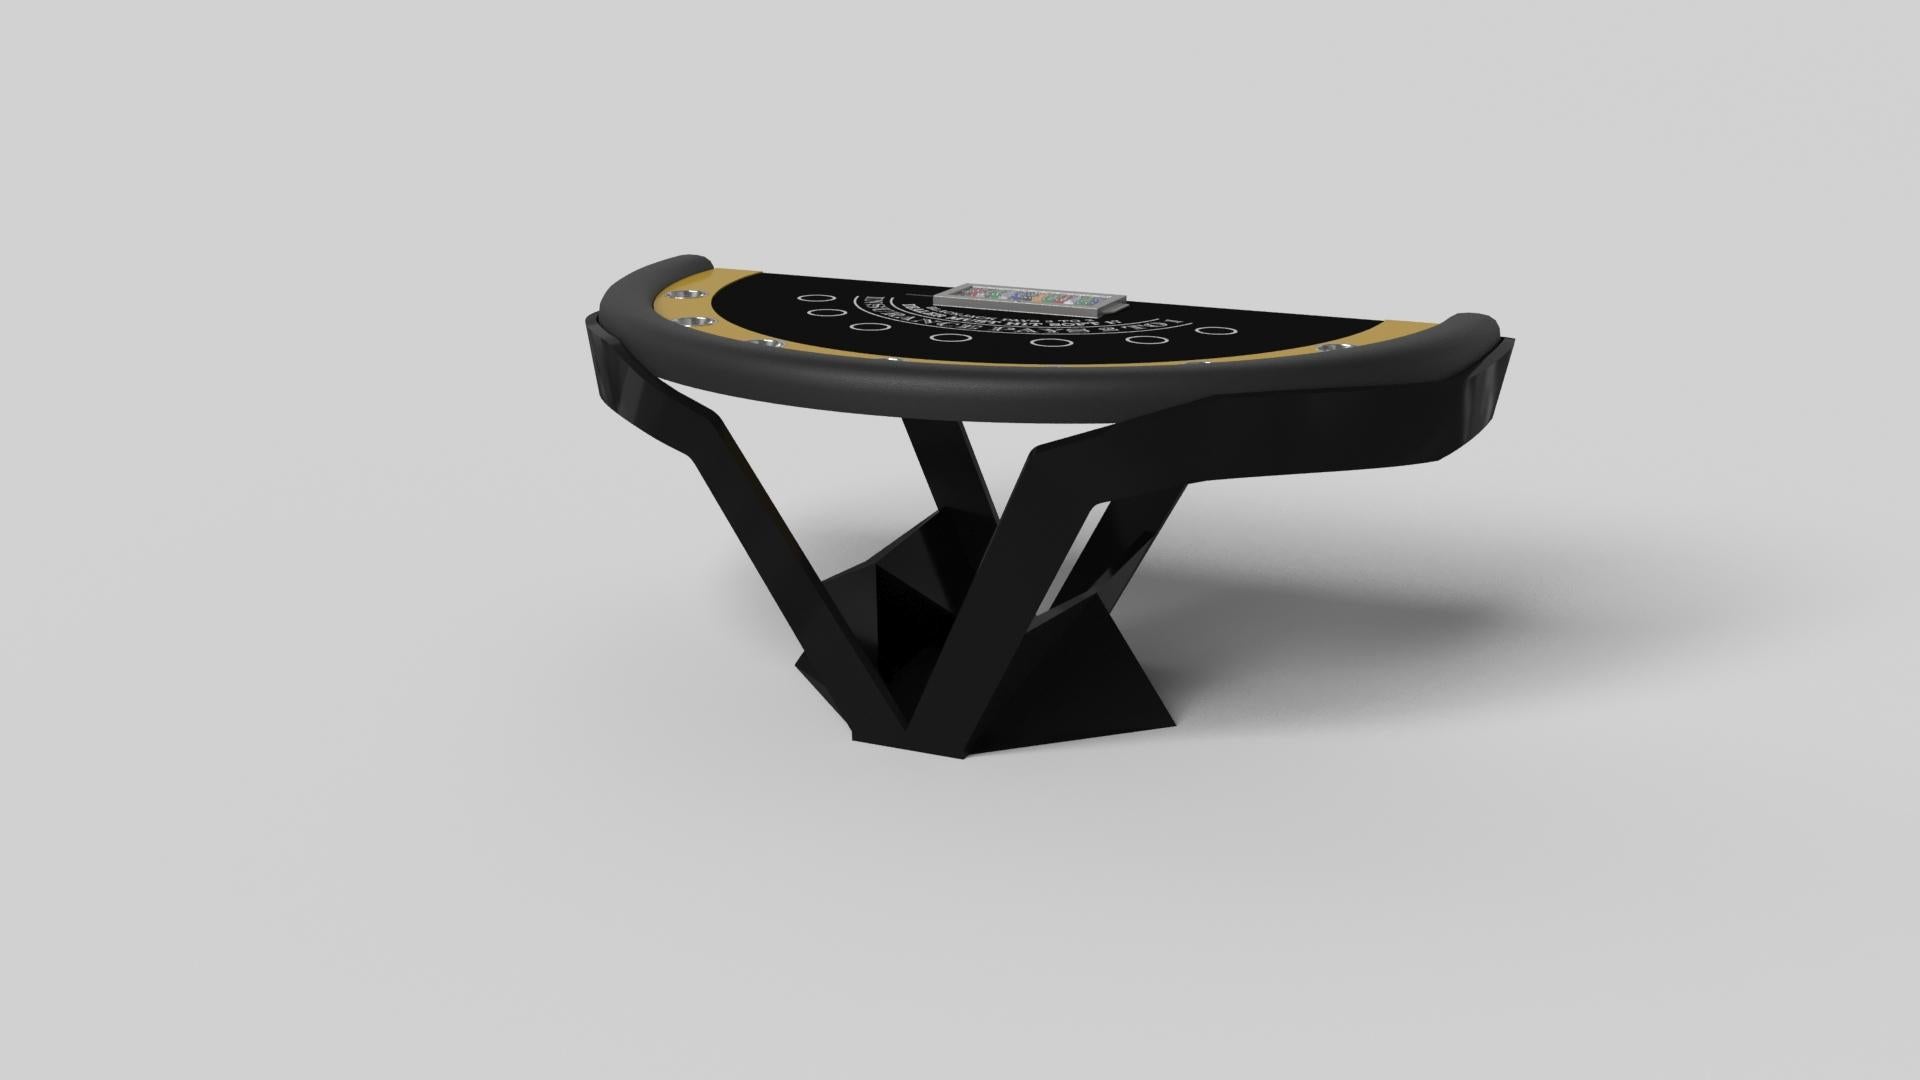 The Enzo blackjack table is Inspired by the aerodynamic angles of top-of-the-line European vehicles. Designed with sleek, V-shaped lines and a thoughtful use of negative space, this table boasts an energetic sense of spirit while epitomizing the